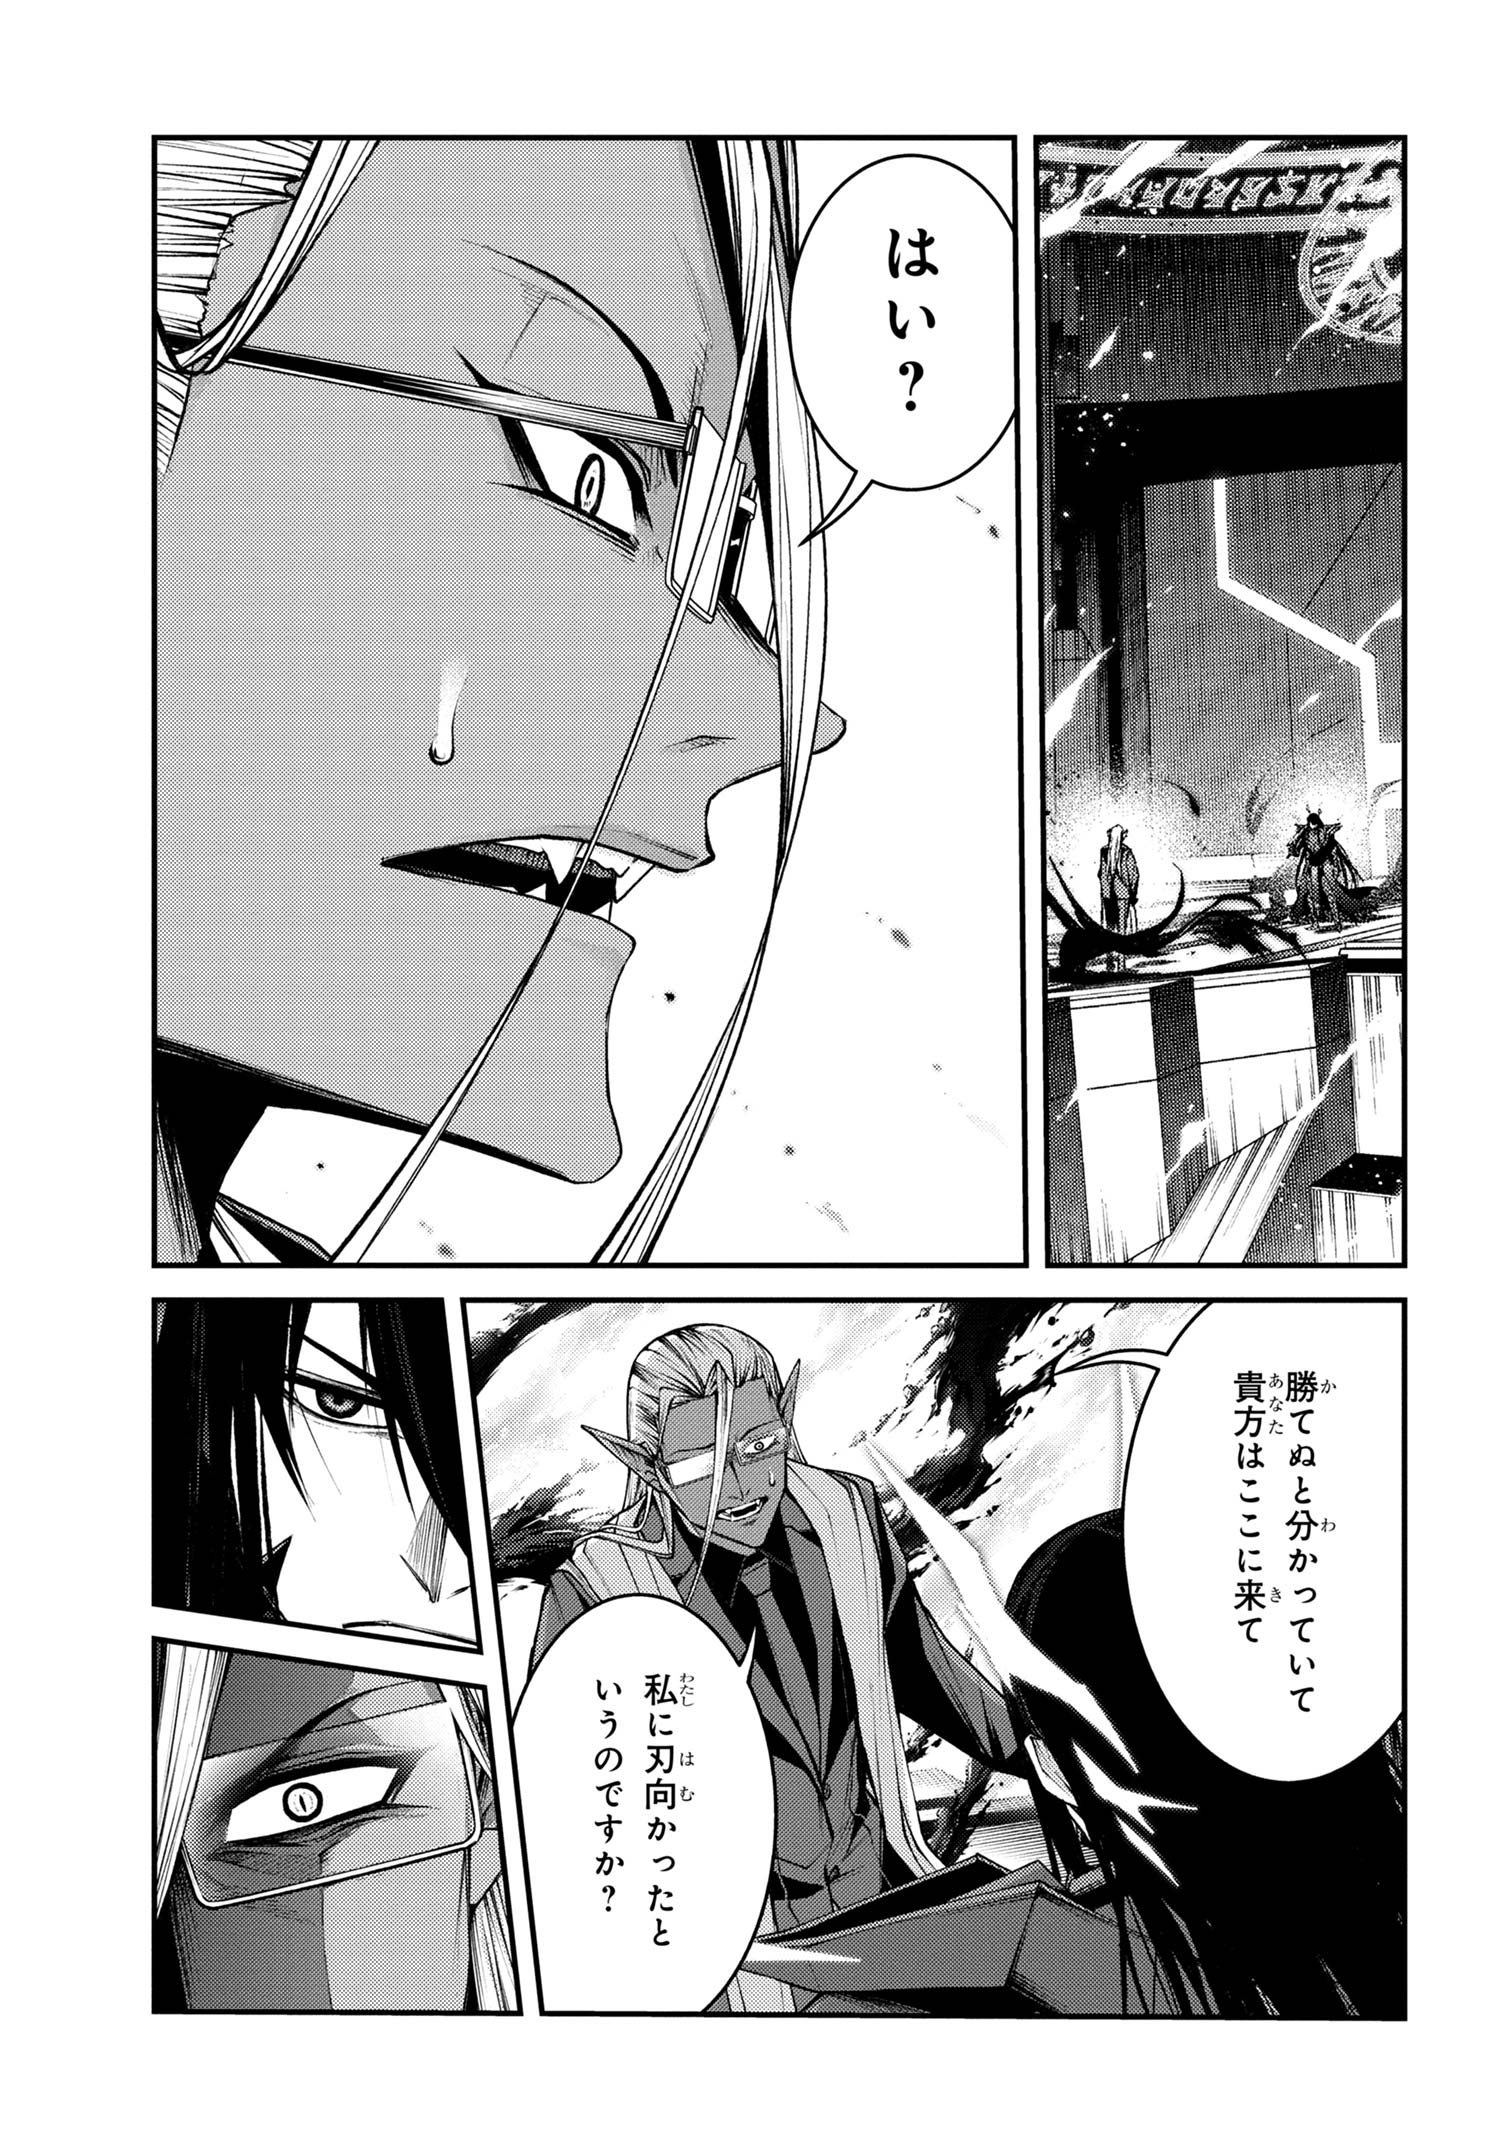 Maou 2099 - Chapter 11.2 - Page 1